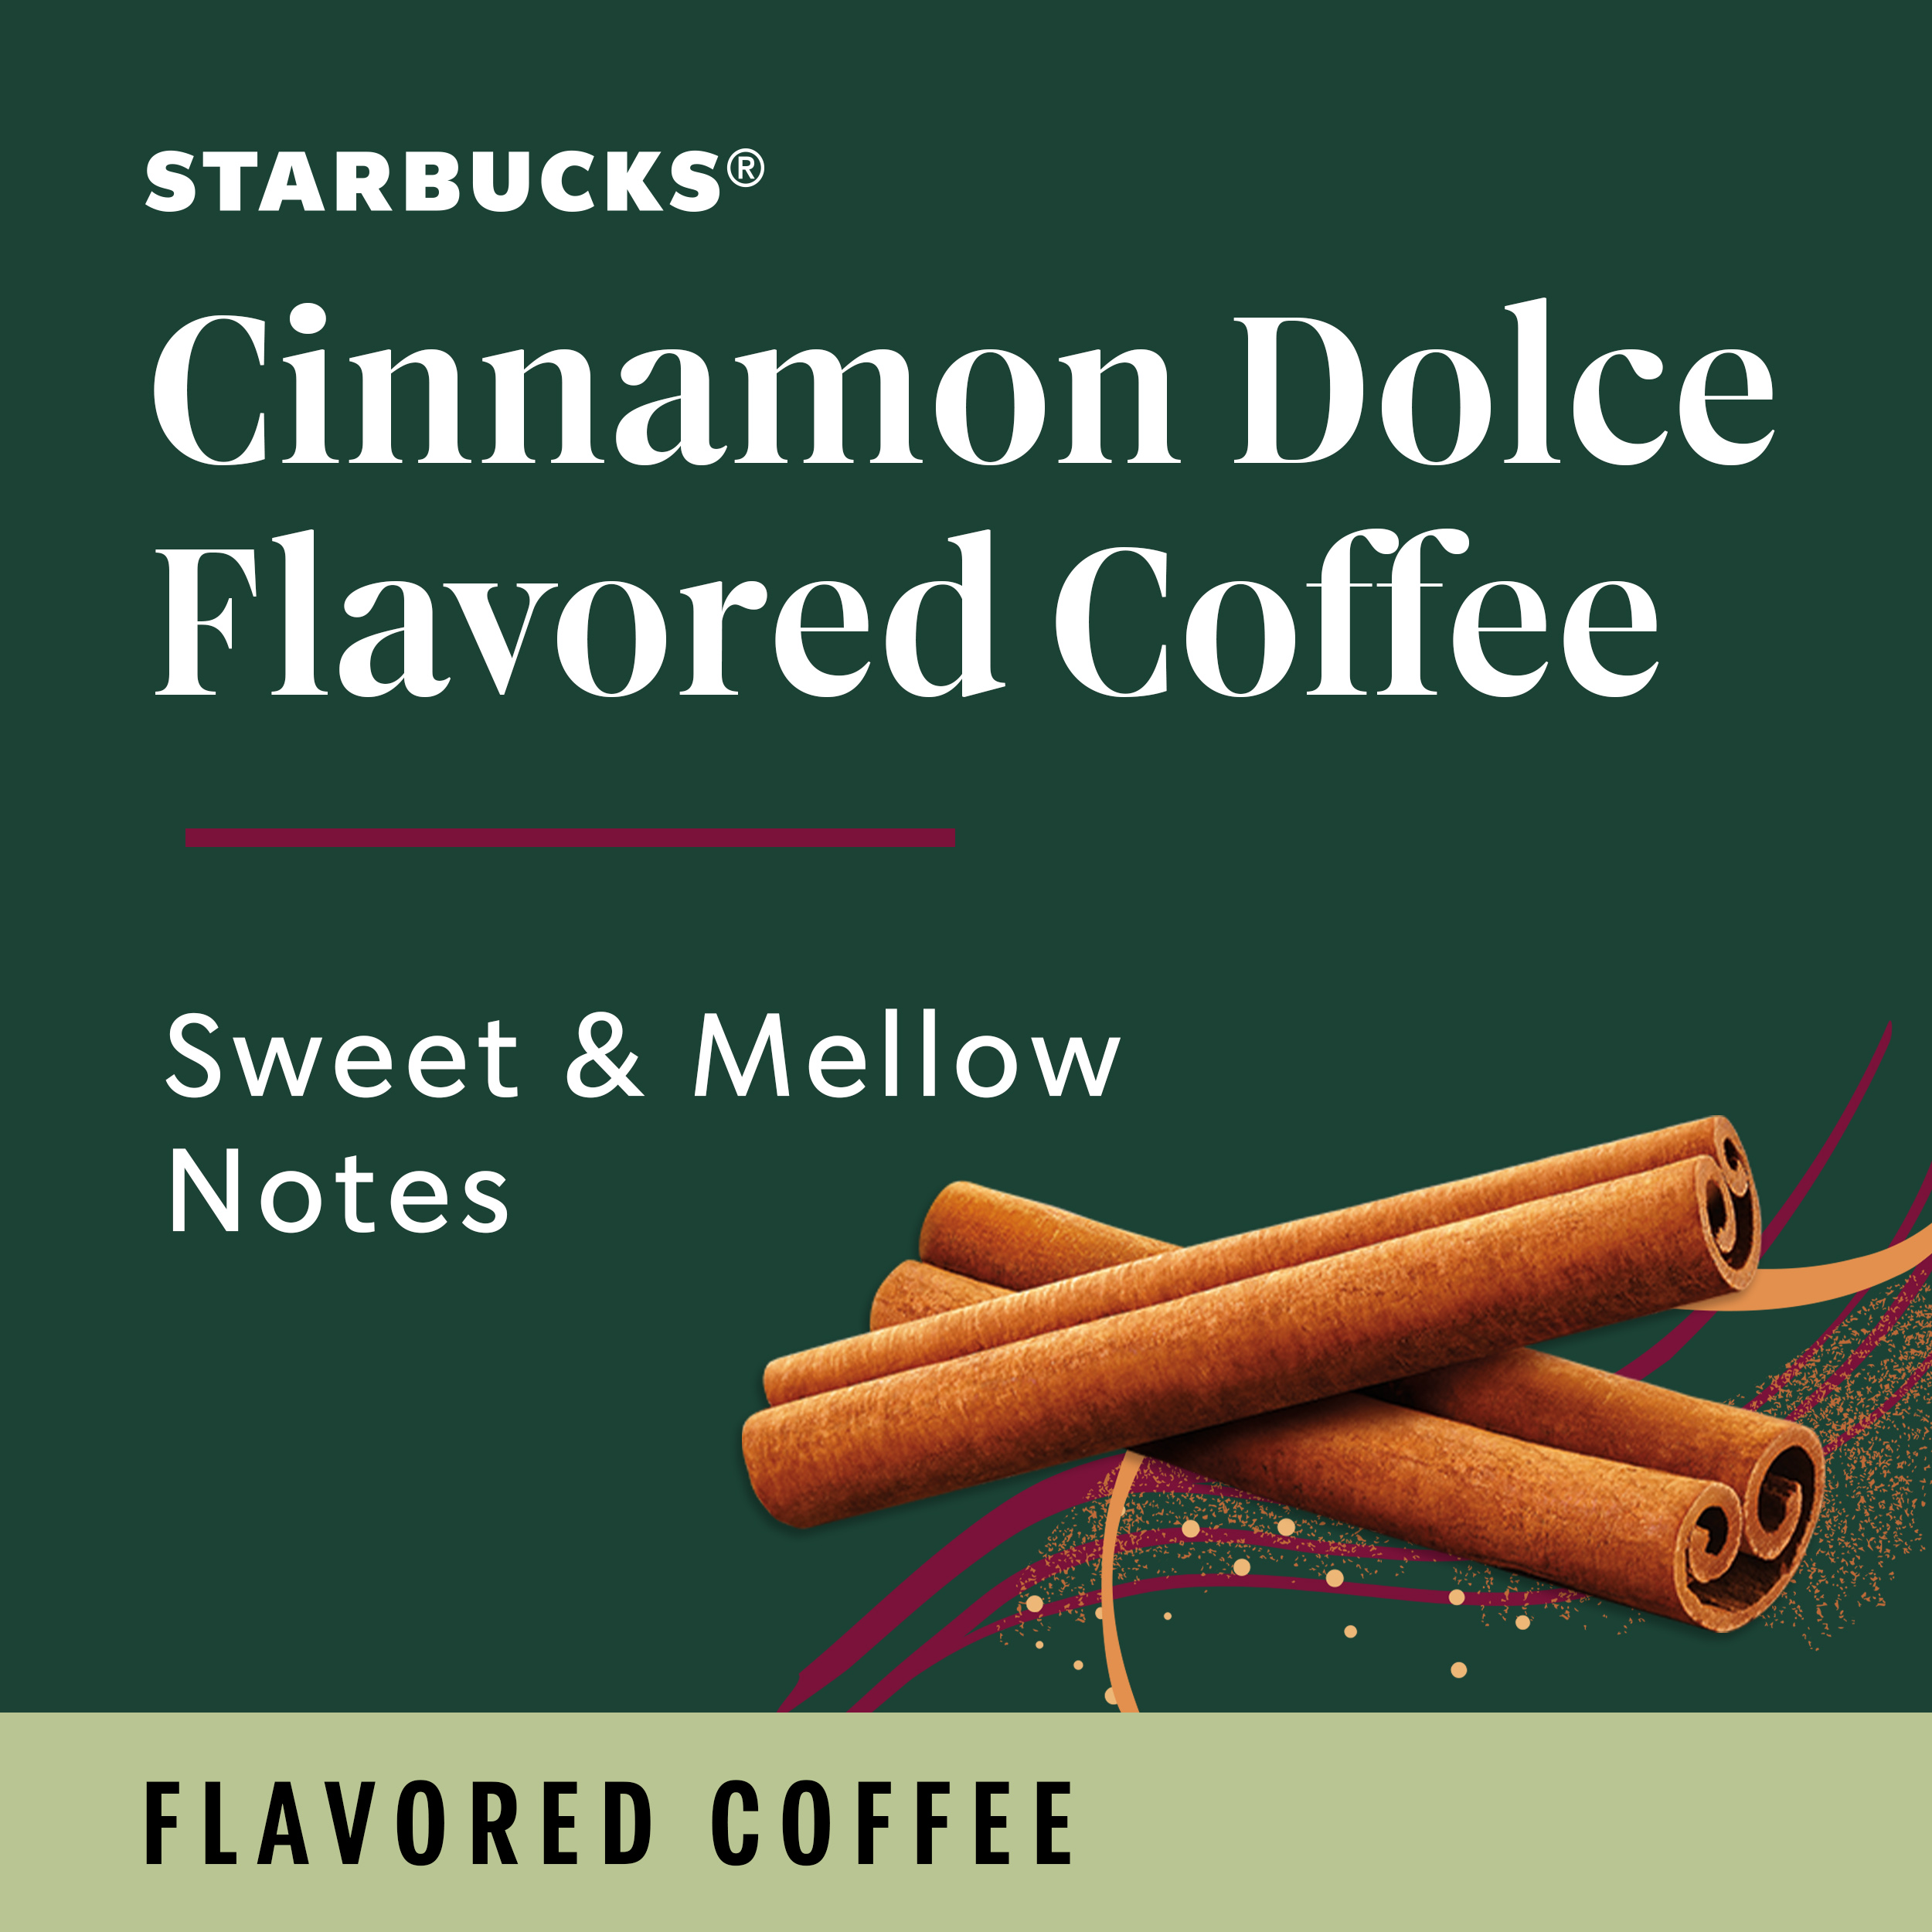 Starbucks Arabica Beans Cinnamon Dolce, Naturally Flavored, Ground Coffee, 11 oz - image 3 of 8